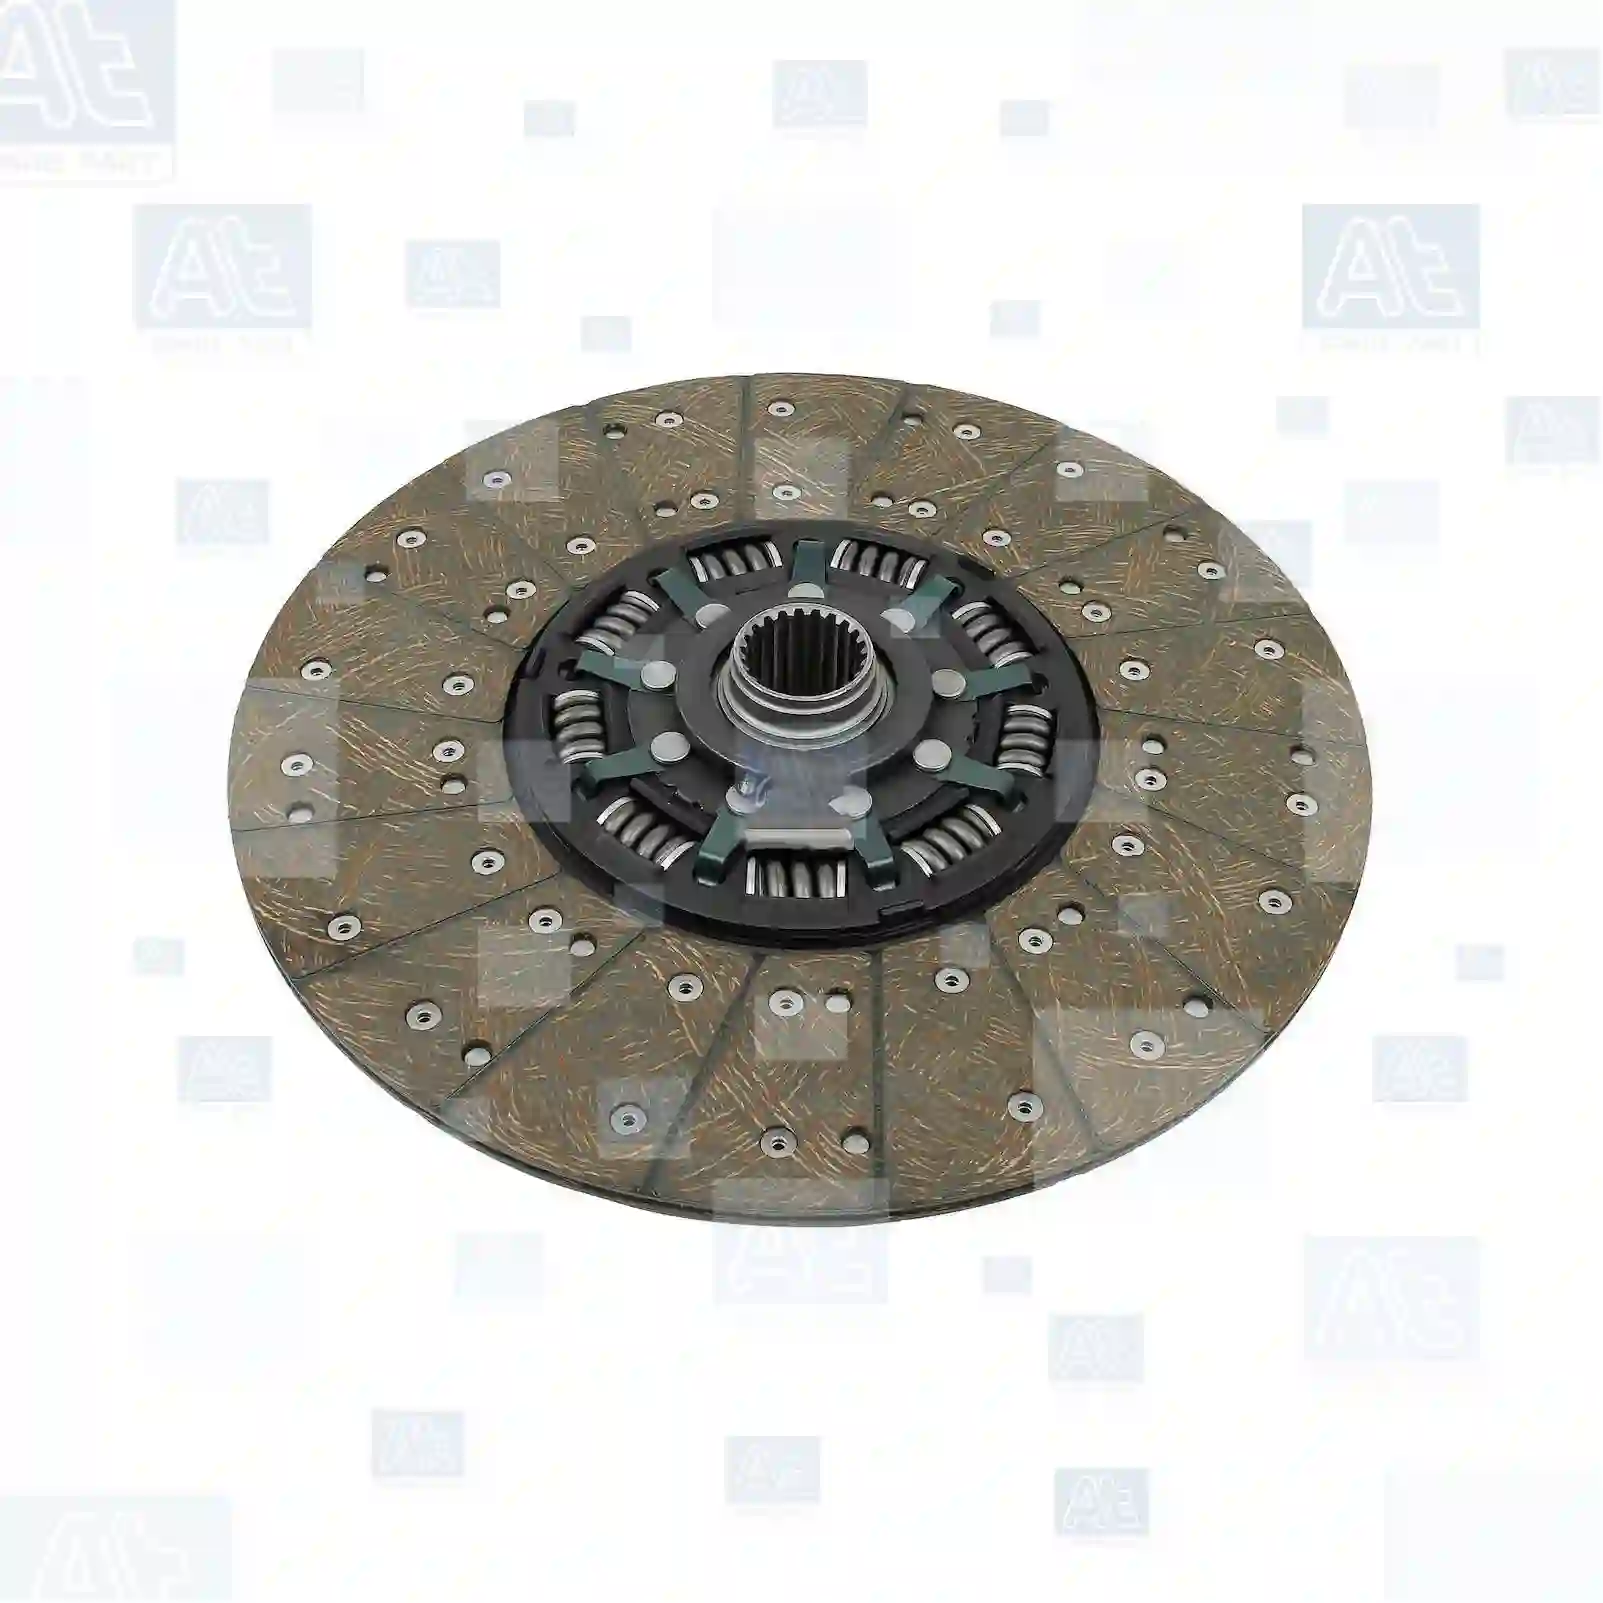 Clutch disc, 77721857, 040145100, 1104305, 1108445, 1111149, 1332108, 304382, 304384, 304394, 329440, 360351, 361055, 365063, 365323, 388139, 550417, 571252, 571253, 571265, 571280, 10571280, 1108445, 1111149, 1571280, 304394, 329440, 360351, 365063, 365223, 365323, 375656, 388139, 571253, 571280, 579210, 579220 ||  77721857 At Spare Part | Engine, Accelerator Pedal, Camshaft, Connecting Rod, Crankcase, Crankshaft, Cylinder Head, Engine Suspension Mountings, Exhaust Manifold, Exhaust Gas Recirculation, Filter Kits, Flywheel Housing, General Overhaul Kits, Engine, Intake Manifold, Oil Cleaner, Oil Cooler, Oil Filter, Oil Pump, Oil Sump, Piston & Liner, Sensor & Switch, Timing Case, Turbocharger, Cooling System, Belt Tensioner, Coolant Filter, Coolant Pipe, Corrosion Prevention Agent, Drive, Expansion Tank, Fan, Intercooler, Monitors & Gauges, Radiator, Thermostat, V-Belt / Timing belt, Water Pump, Fuel System, Electronical Injector Unit, Feed Pump, Fuel Filter, cpl., Fuel Gauge Sender,  Fuel Line, Fuel Pump, Fuel Tank, Injection Line Kit, Injection Pump, Exhaust System, Clutch & Pedal, Gearbox, Propeller Shaft, Axles, Brake System, Hubs & Wheels, Suspension, Leaf Spring, Universal Parts / Accessories, Steering, Electrical System, Cabin Clutch disc, 77721857, 040145100, 1104305, 1108445, 1111149, 1332108, 304382, 304384, 304394, 329440, 360351, 361055, 365063, 365323, 388139, 550417, 571252, 571253, 571265, 571280, 10571280, 1108445, 1111149, 1571280, 304394, 329440, 360351, 365063, 365223, 365323, 375656, 388139, 571253, 571280, 579210, 579220 ||  77721857 At Spare Part | Engine, Accelerator Pedal, Camshaft, Connecting Rod, Crankcase, Crankshaft, Cylinder Head, Engine Suspension Mountings, Exhaust Manifold, Exhaust Gas Recirculation, Filter Kits, Flywheel Housing, General Overhaul Kits, Engine, Intake Manifold, Oil Cleaner, Oil Cooler, Oil Filter, Oil Pump, Oil Sump, Piston & Liner, Sensor & Switch, Timing Case, Turbocharger, Cooling System, Belt Tensioner, Coolant Filter, Coolant Pipe, Corrosion Prevention Agent, Drive, Expansion Tank, Fan, Intercooler, Monitors & Gauges, Radiator, Thermostat, V-Belt / Timing belt, Water Pump, Fuel System, Electronical Injector Unit, Feed Pump, Fuel Filter, cpl., Fuel Gauge Sender,  Fuel Line, Fuel Pump, Fuel Tank, Injection Line Kit, Injection Pump, Exhaust System, Clutch & Pedal, Gearbox, Propeller Shaft, Axles, Brake System, Hubs & Wheels, Suspension, Leaf Spring, Universal Parts / Accessories, Steering, Electrical System, Cabin